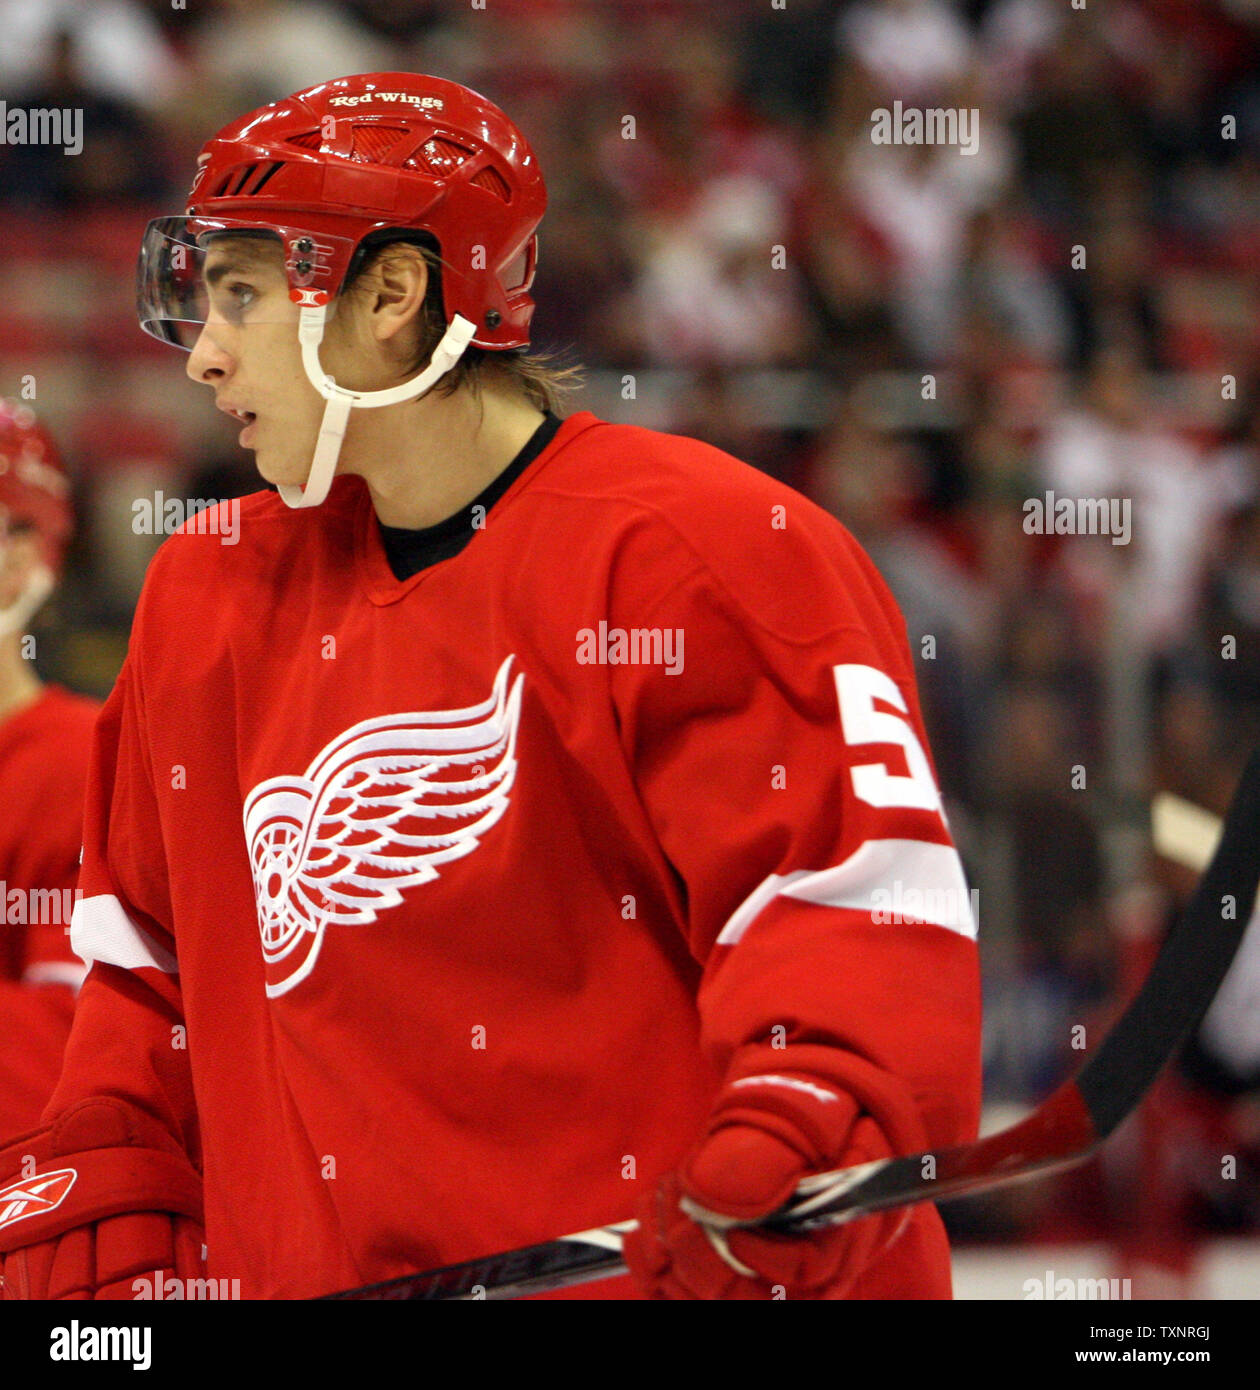 Pavel Datsyuk, ex-Detroit Red Wings star, signs with hometown team